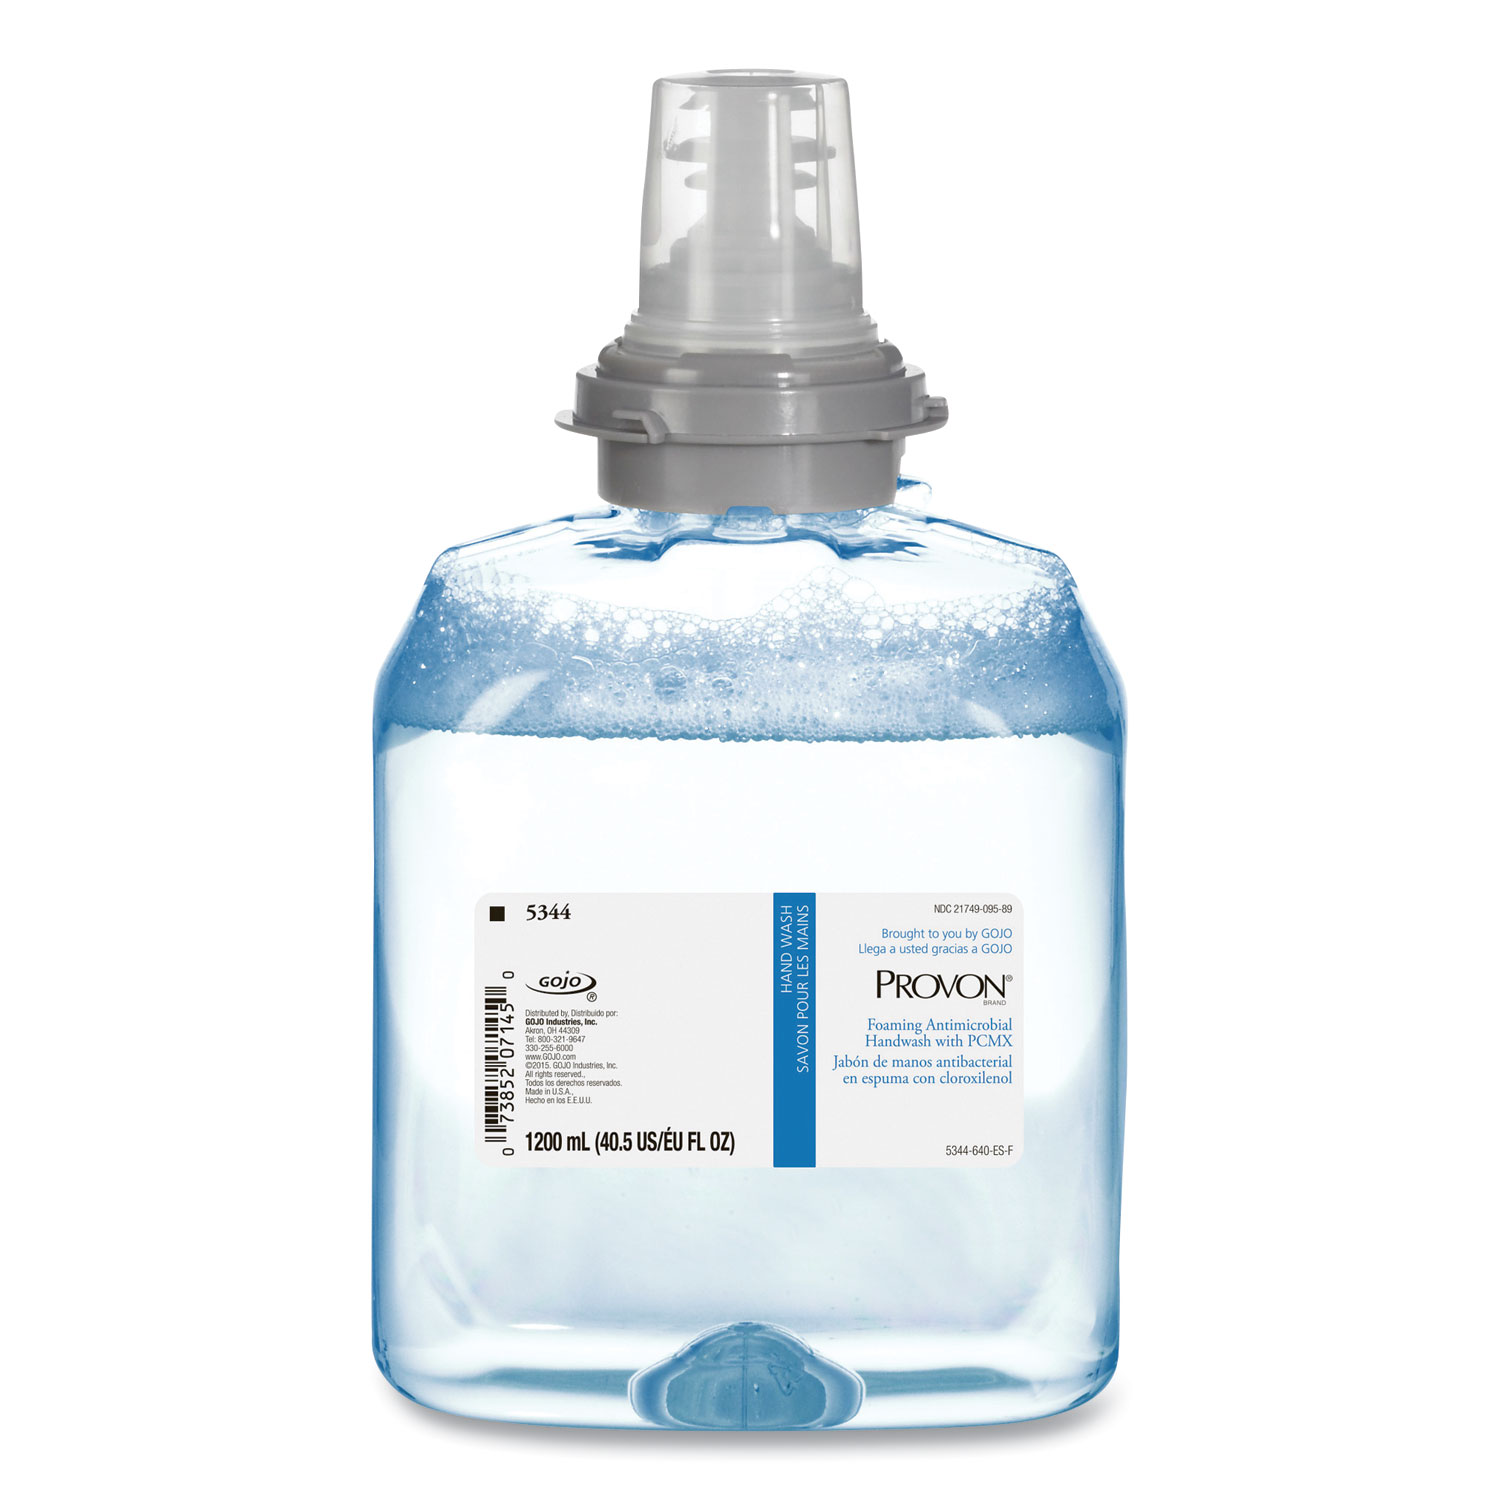 PROVON® Foaming Antimicrobial Handwash with PCMX, Floral, 1,200 mL Refill for TFX Dispenser, 2/Carton